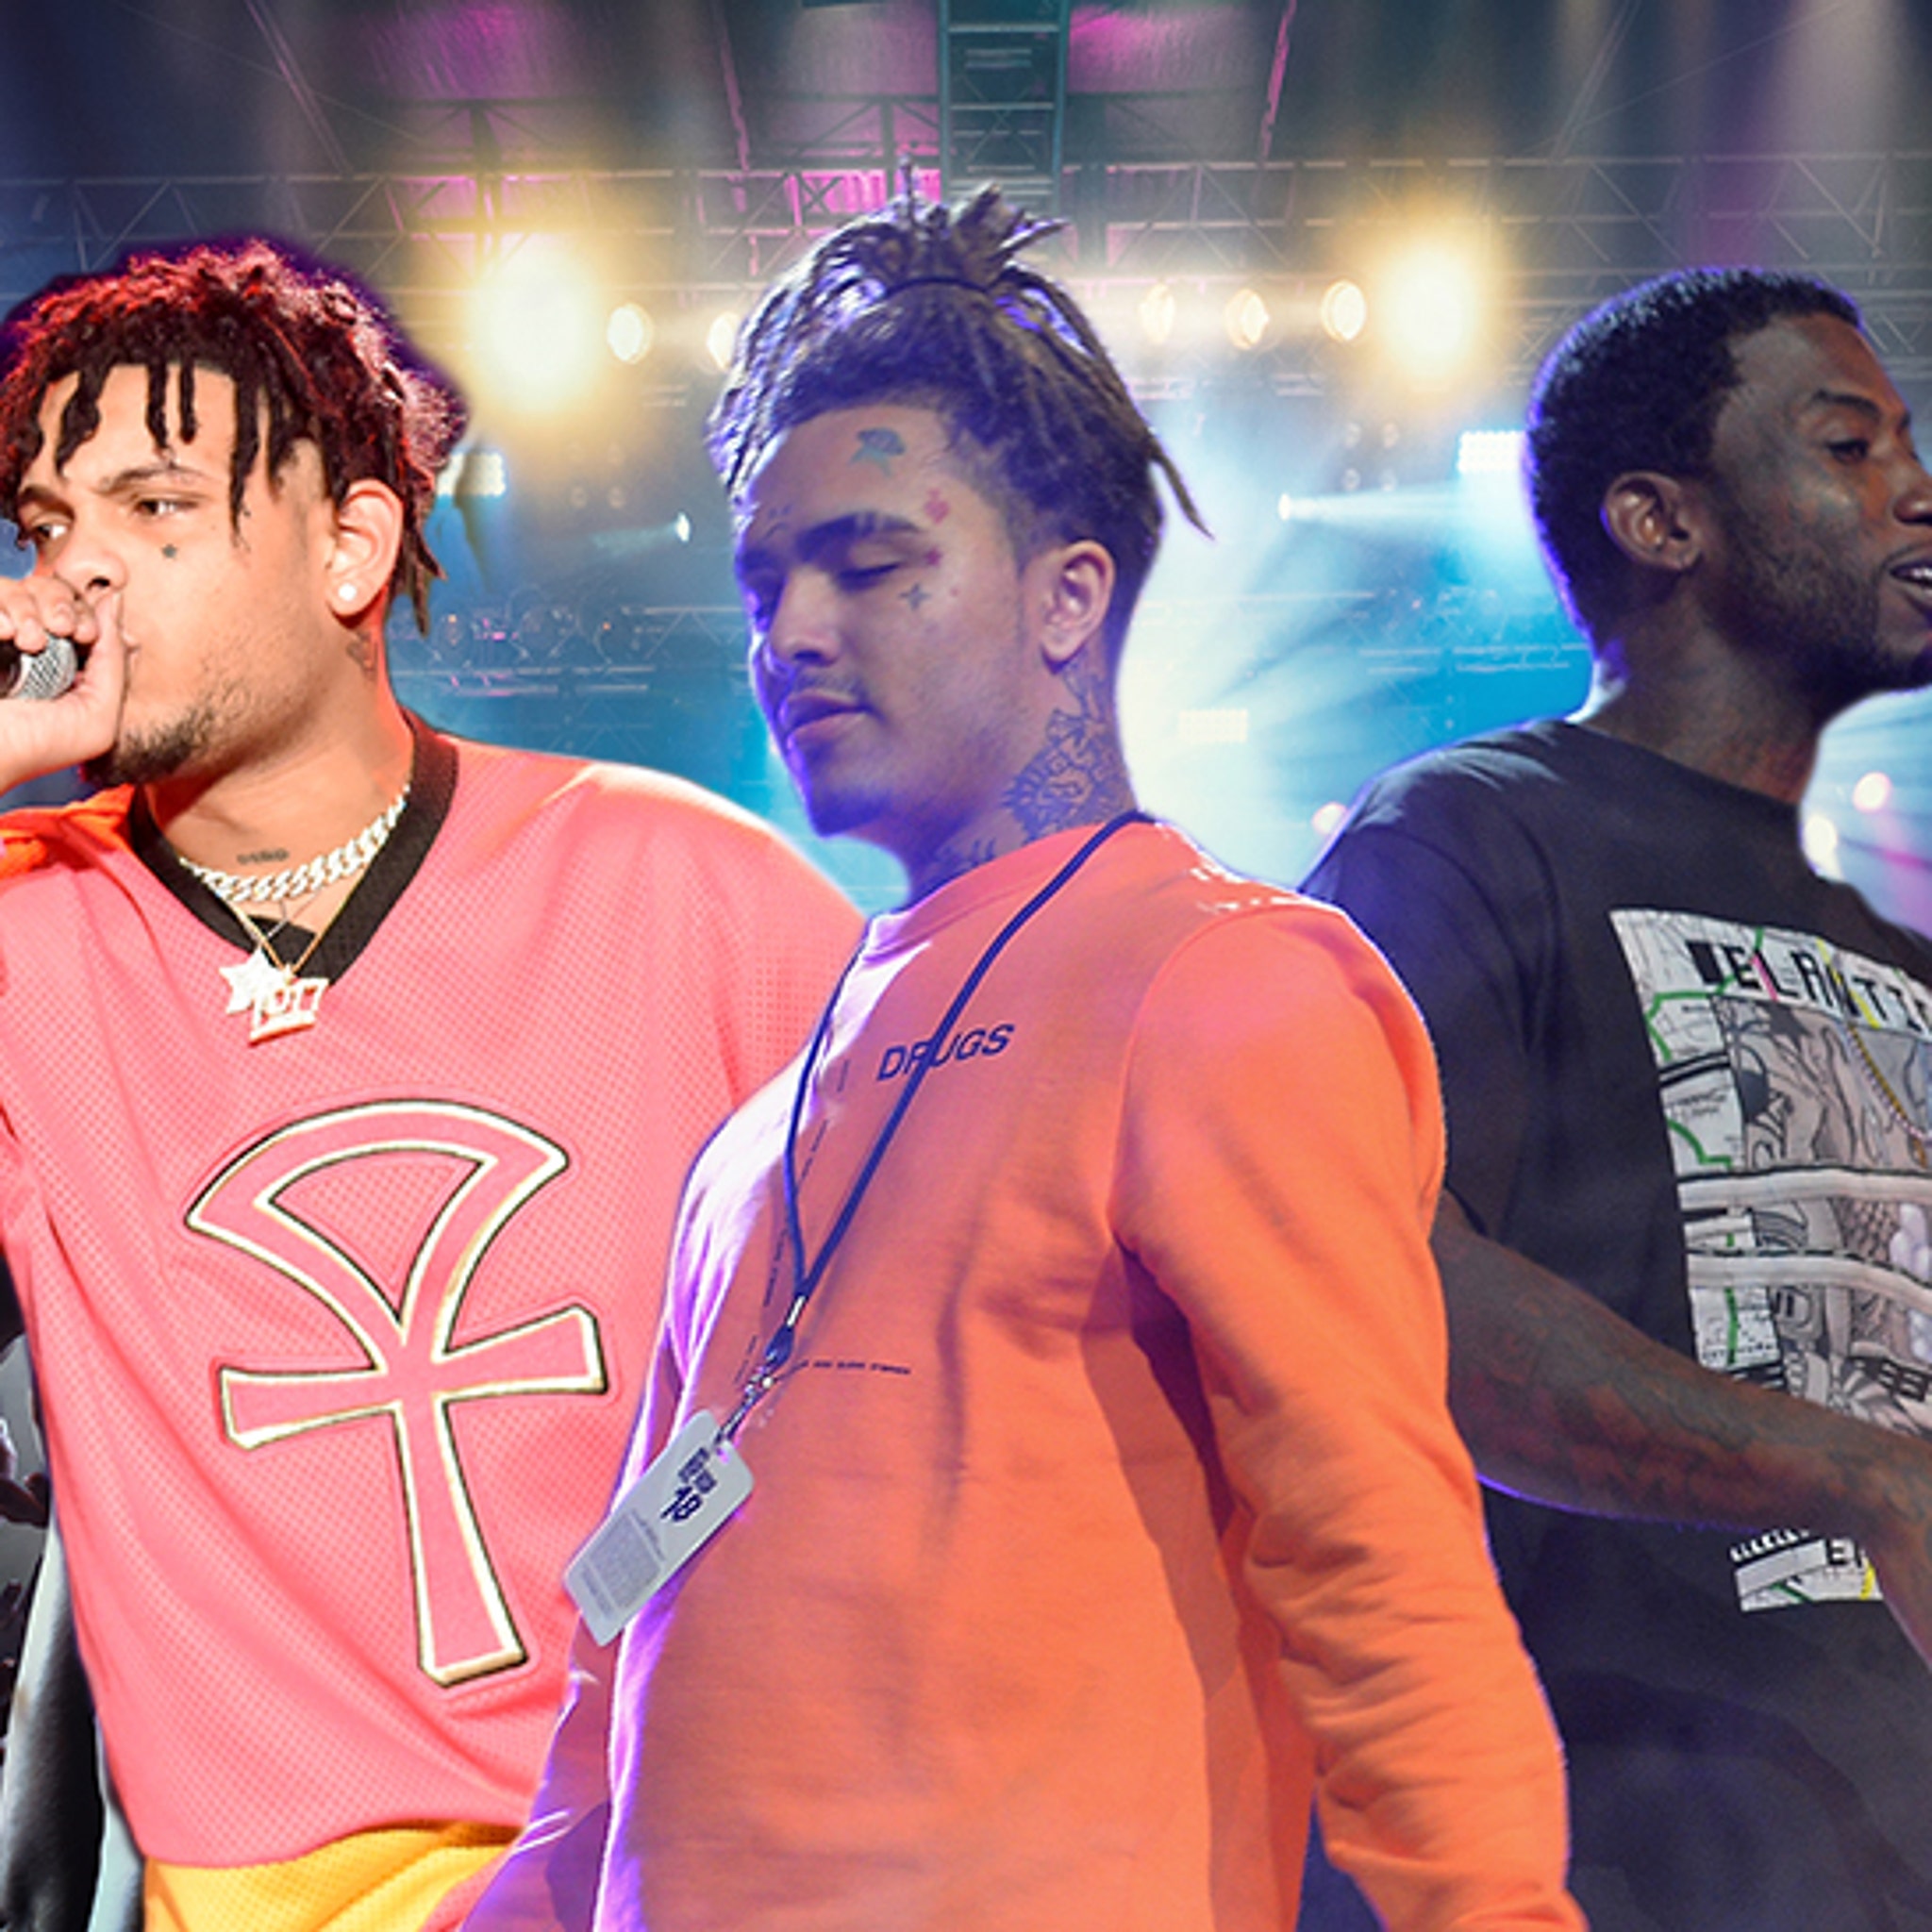 sti Optø, optø, frost tø medier Gucci Mane, Lil Pump, Smokepurpp Out to Make Gucci Gang Blow Up in 2019